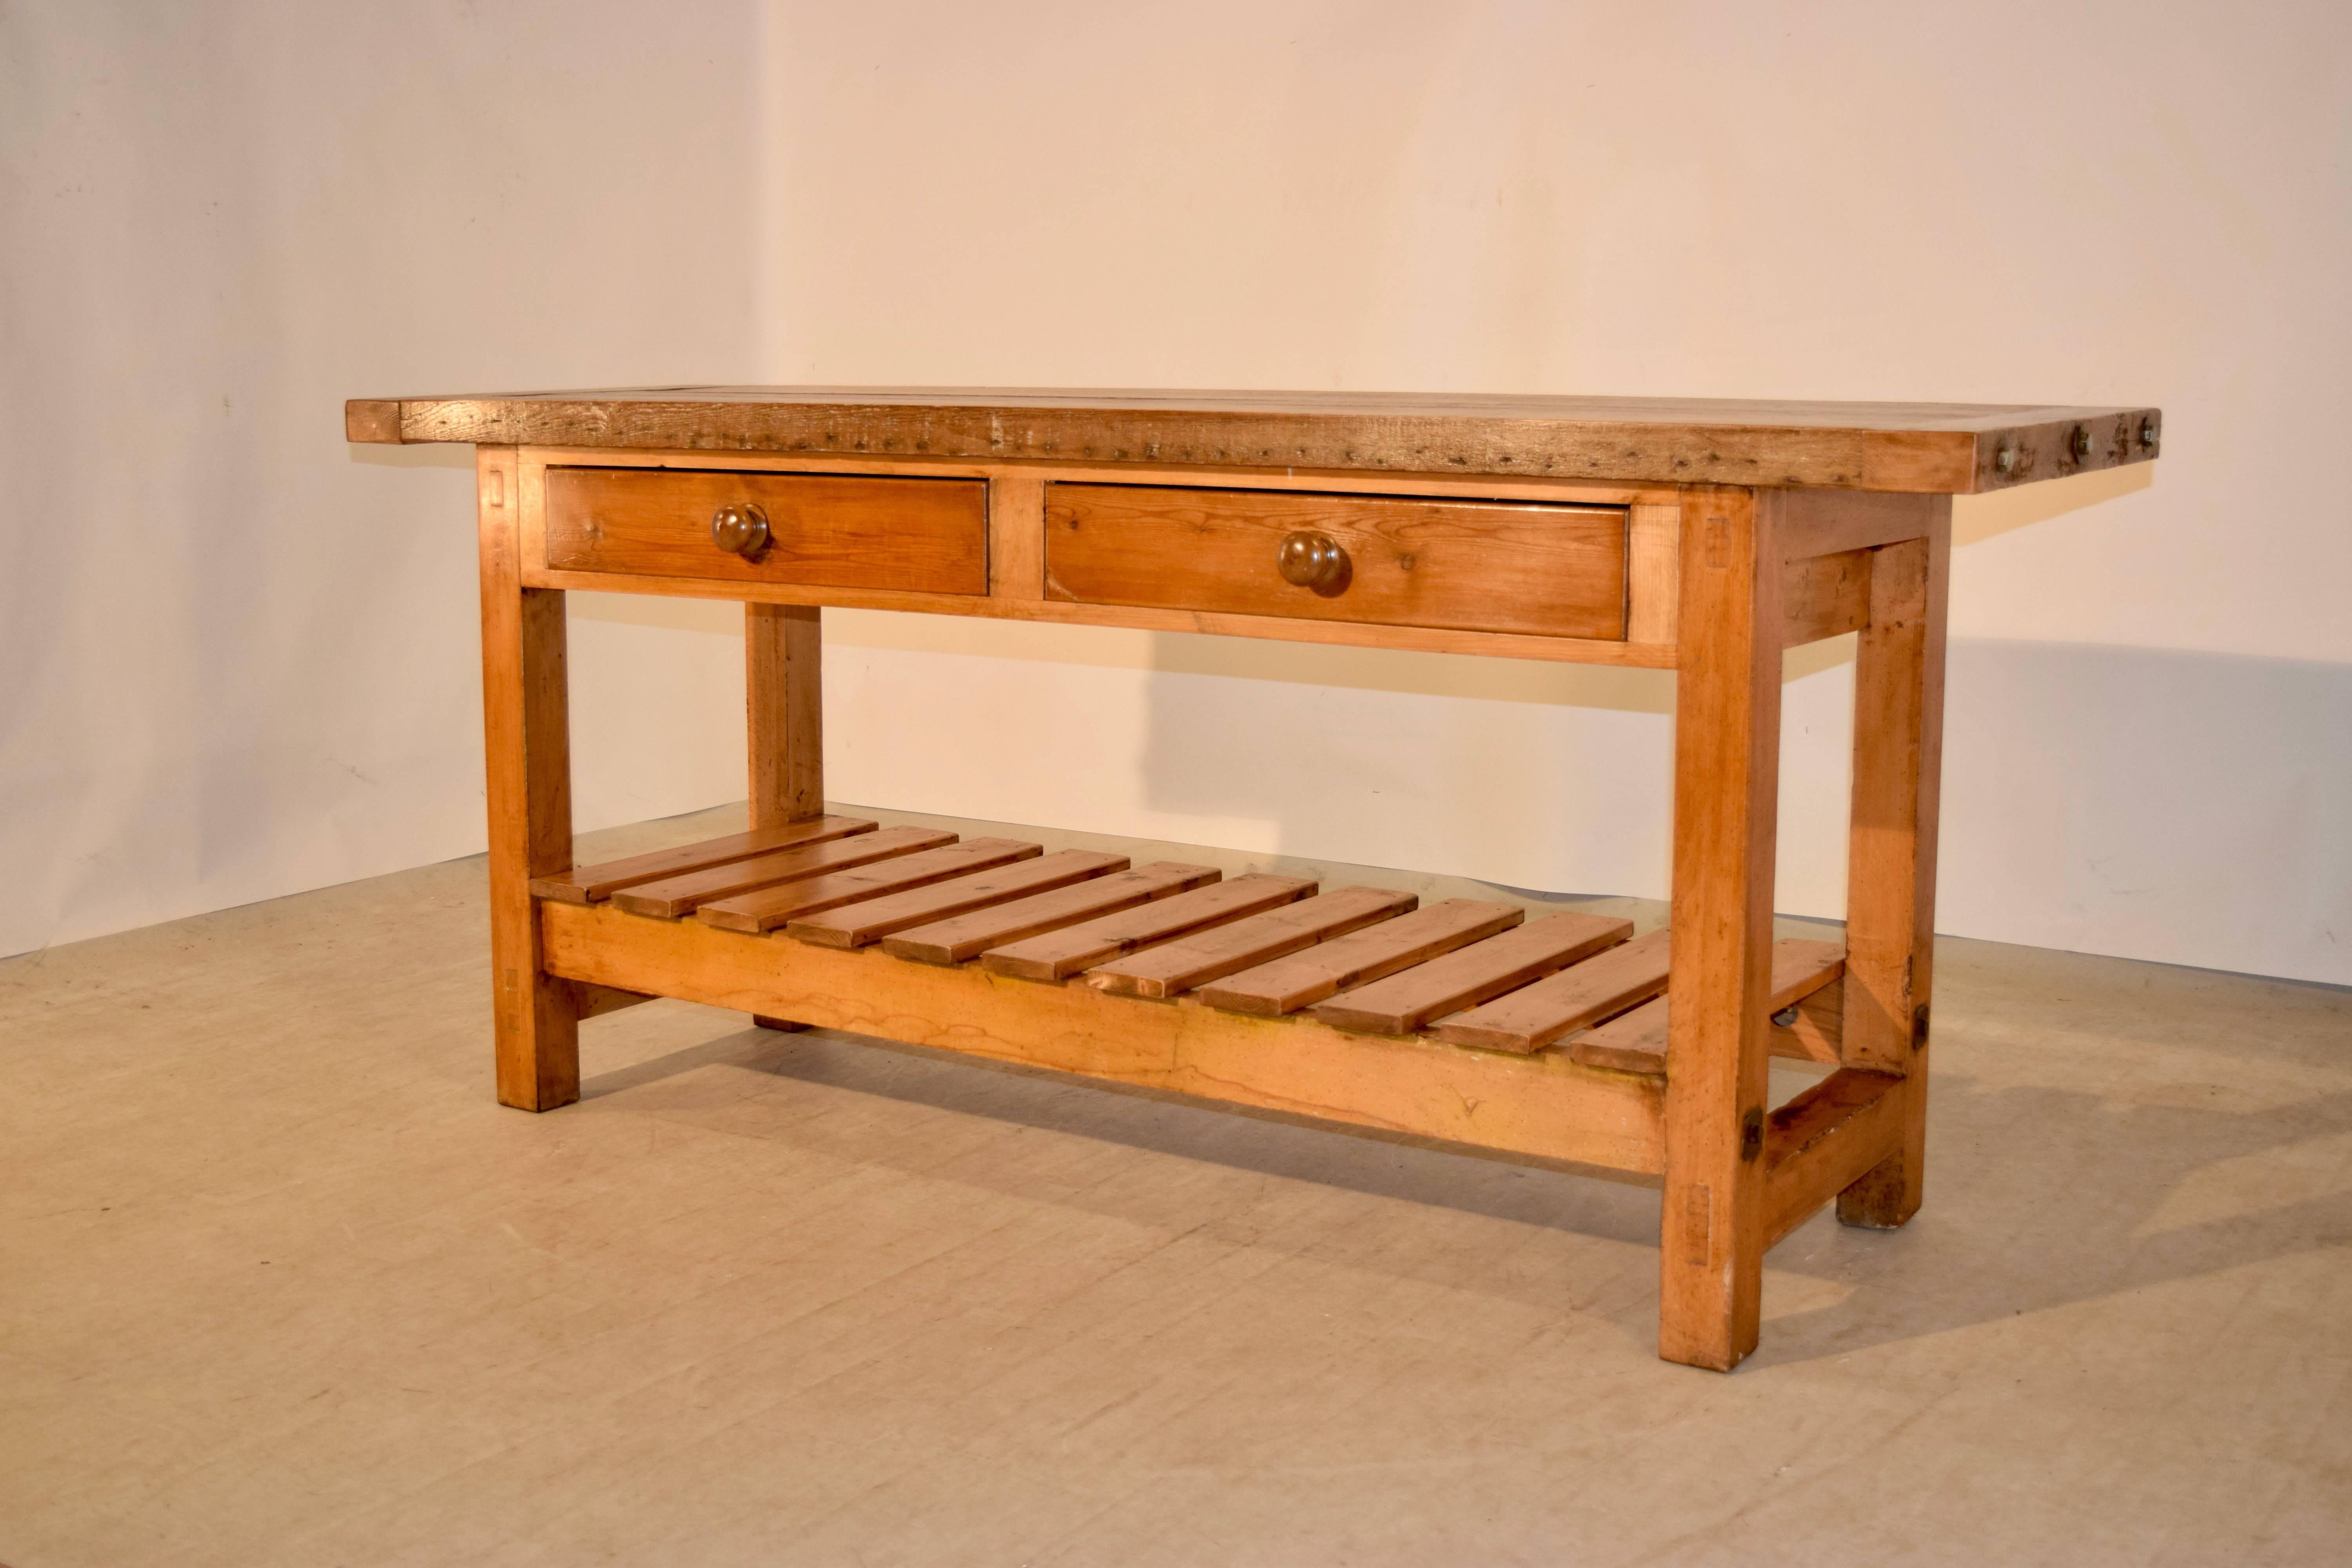 Late 19th century pine work table from England with a 2